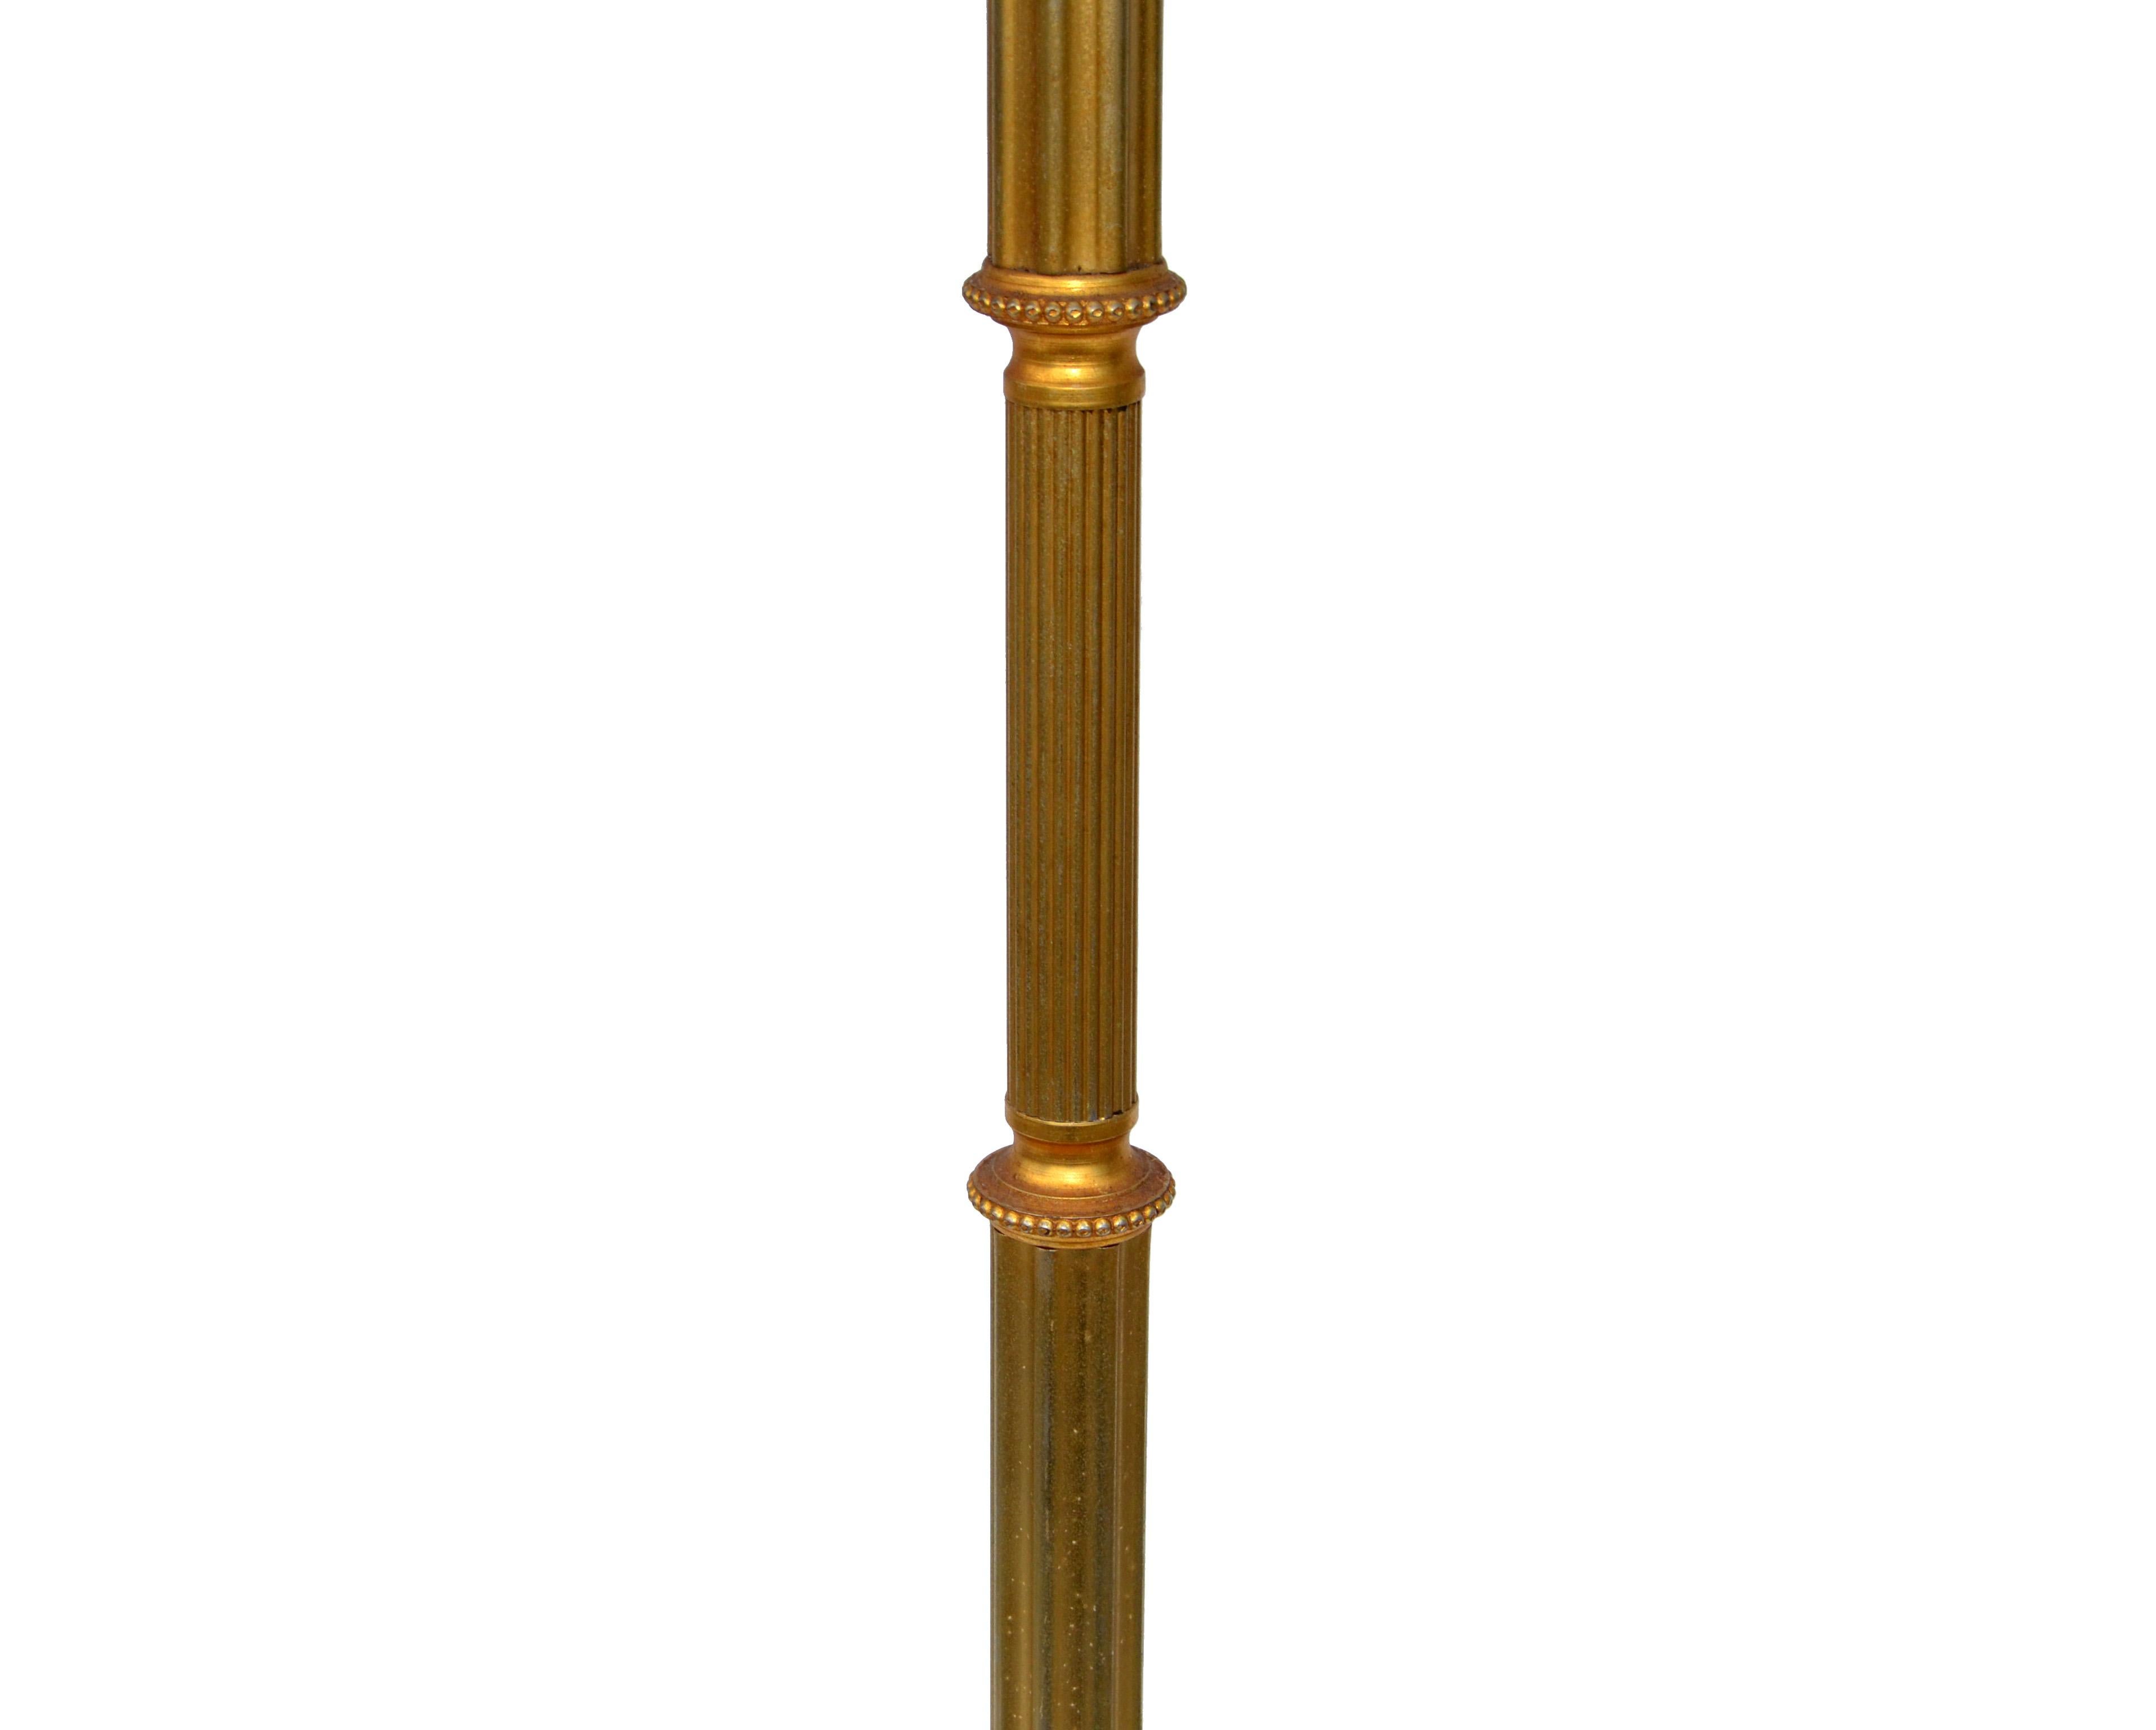 Maison Baguès Style French Neoclassical Bronze Floor Lamp Tripod Base In Good Condition For Sale In Miami, FL